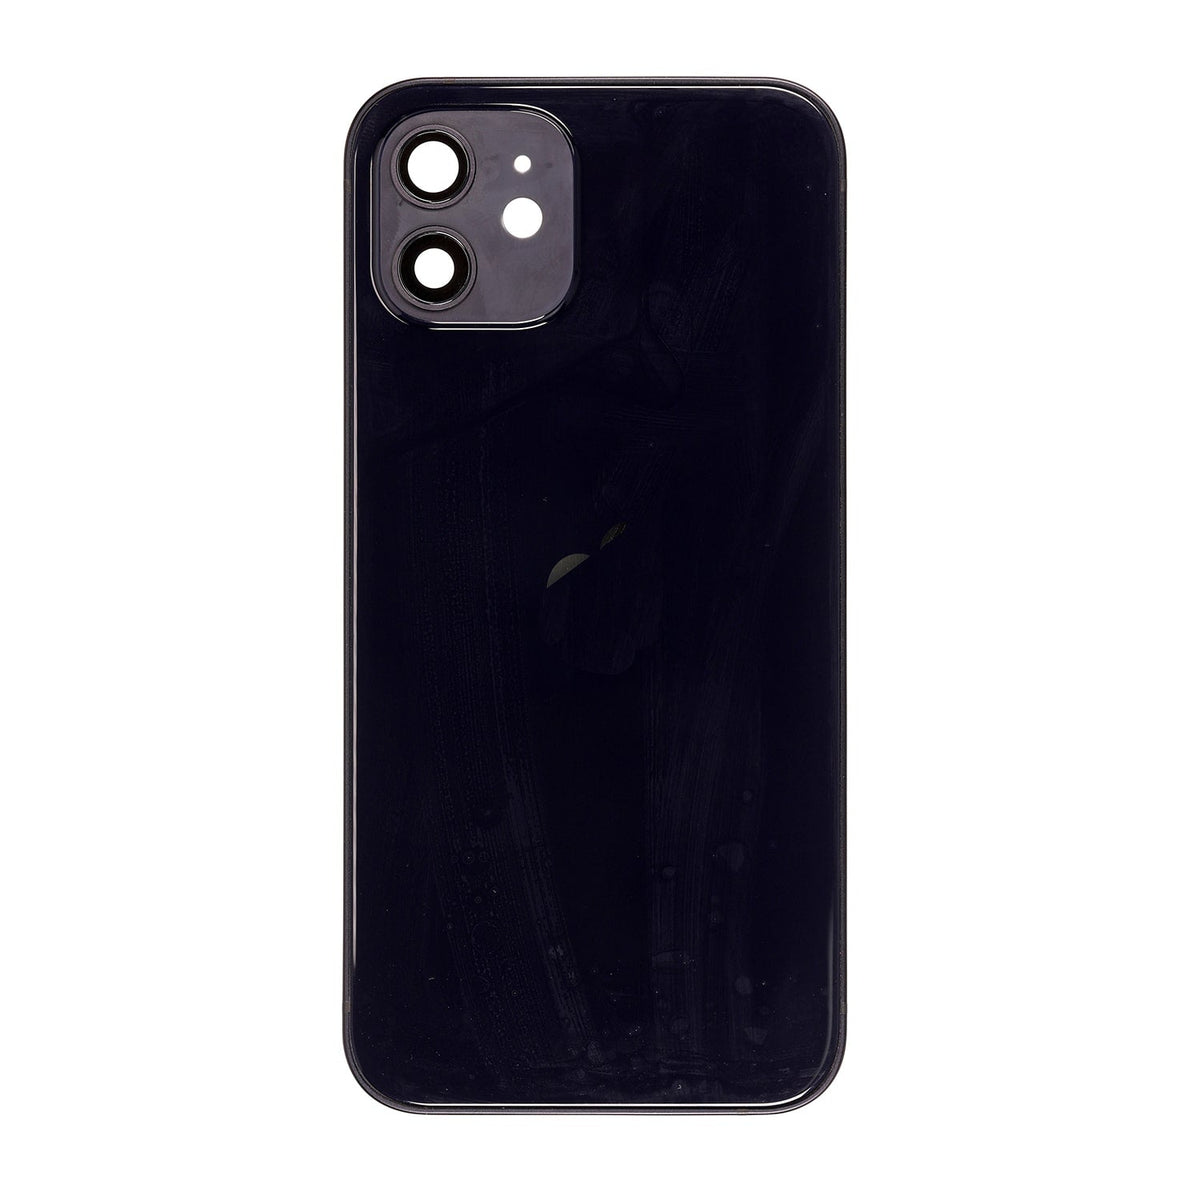 REAR HOUSING WITH FRAME FOR IPHONE 12 - BLACK